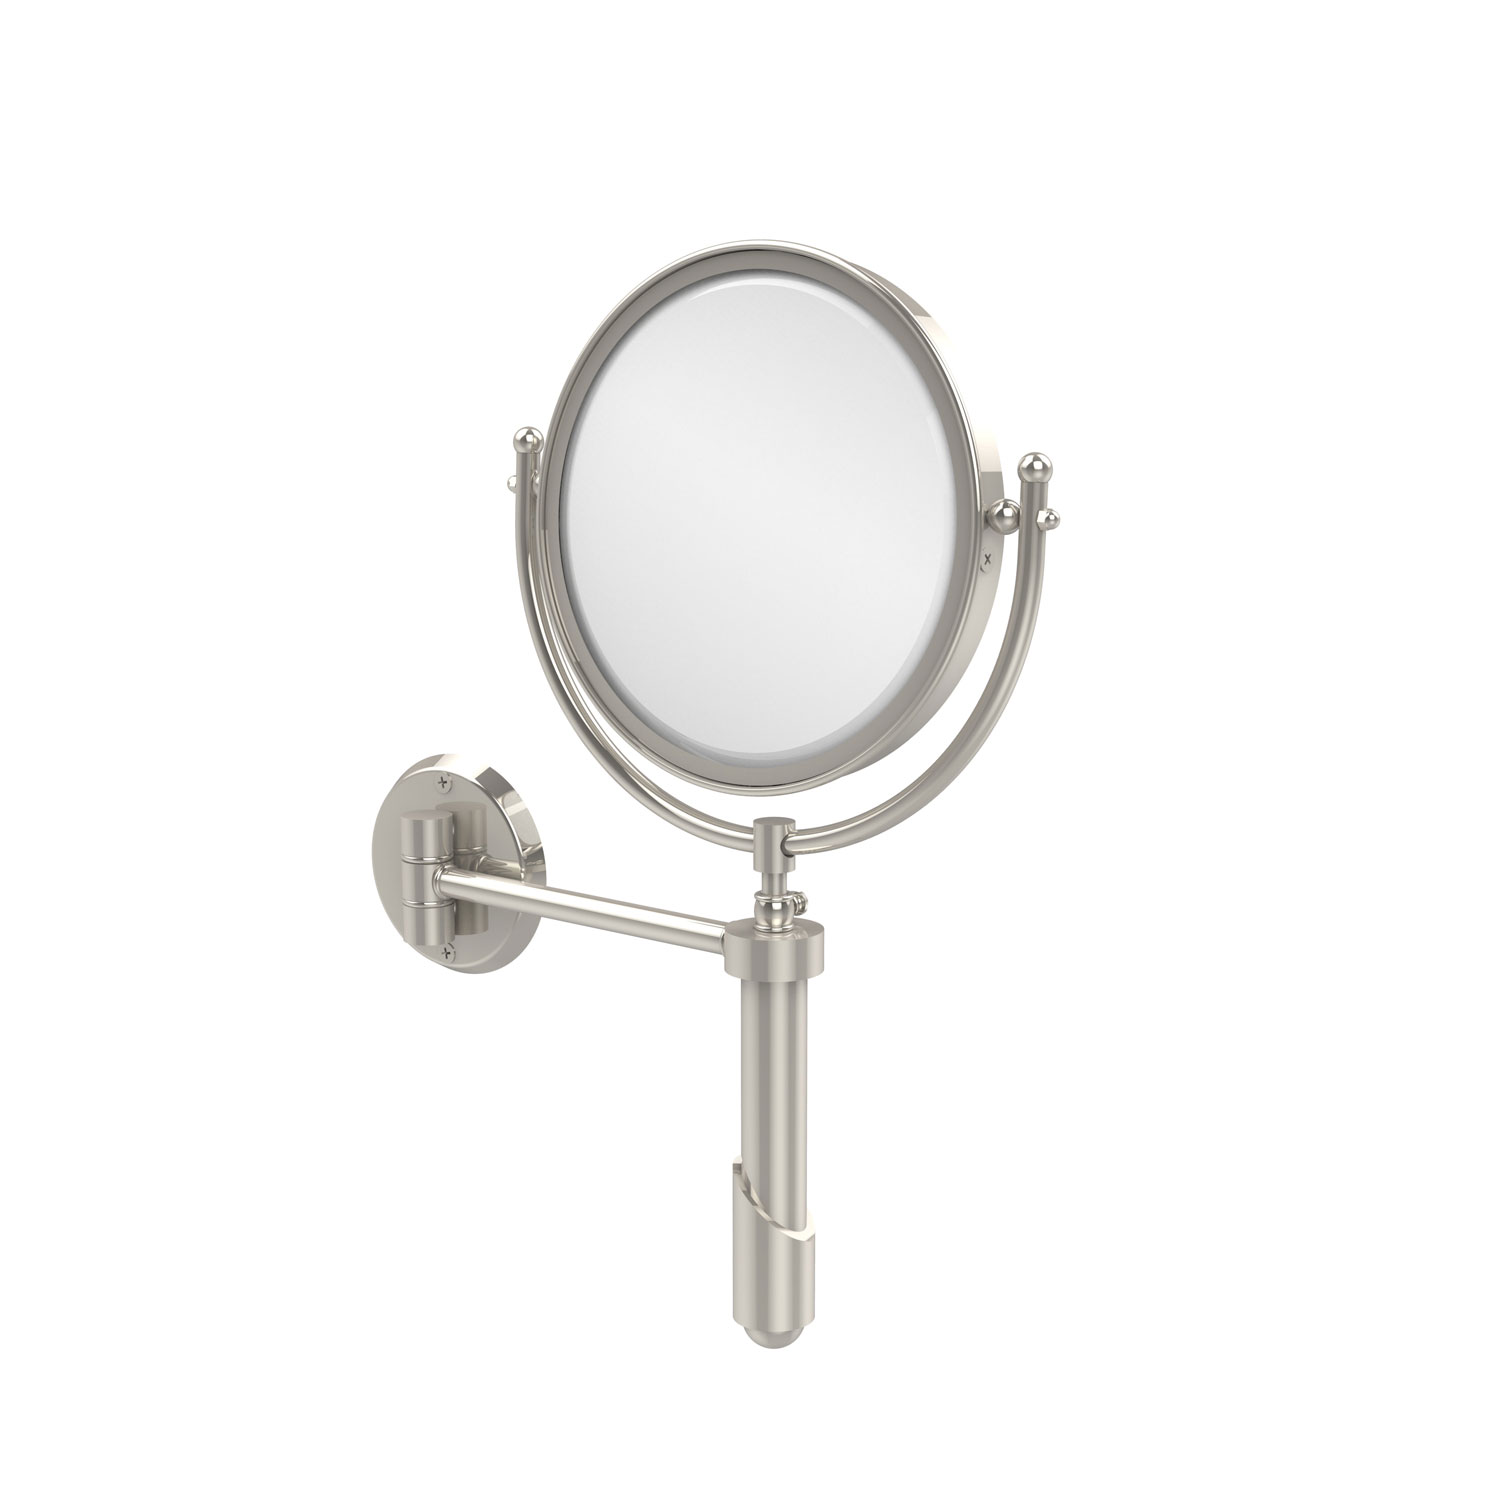 Soho Collection Wall Mounted Make-Up Mirror 8 Inch Diameter With 2X Magnification, Polished Nickel